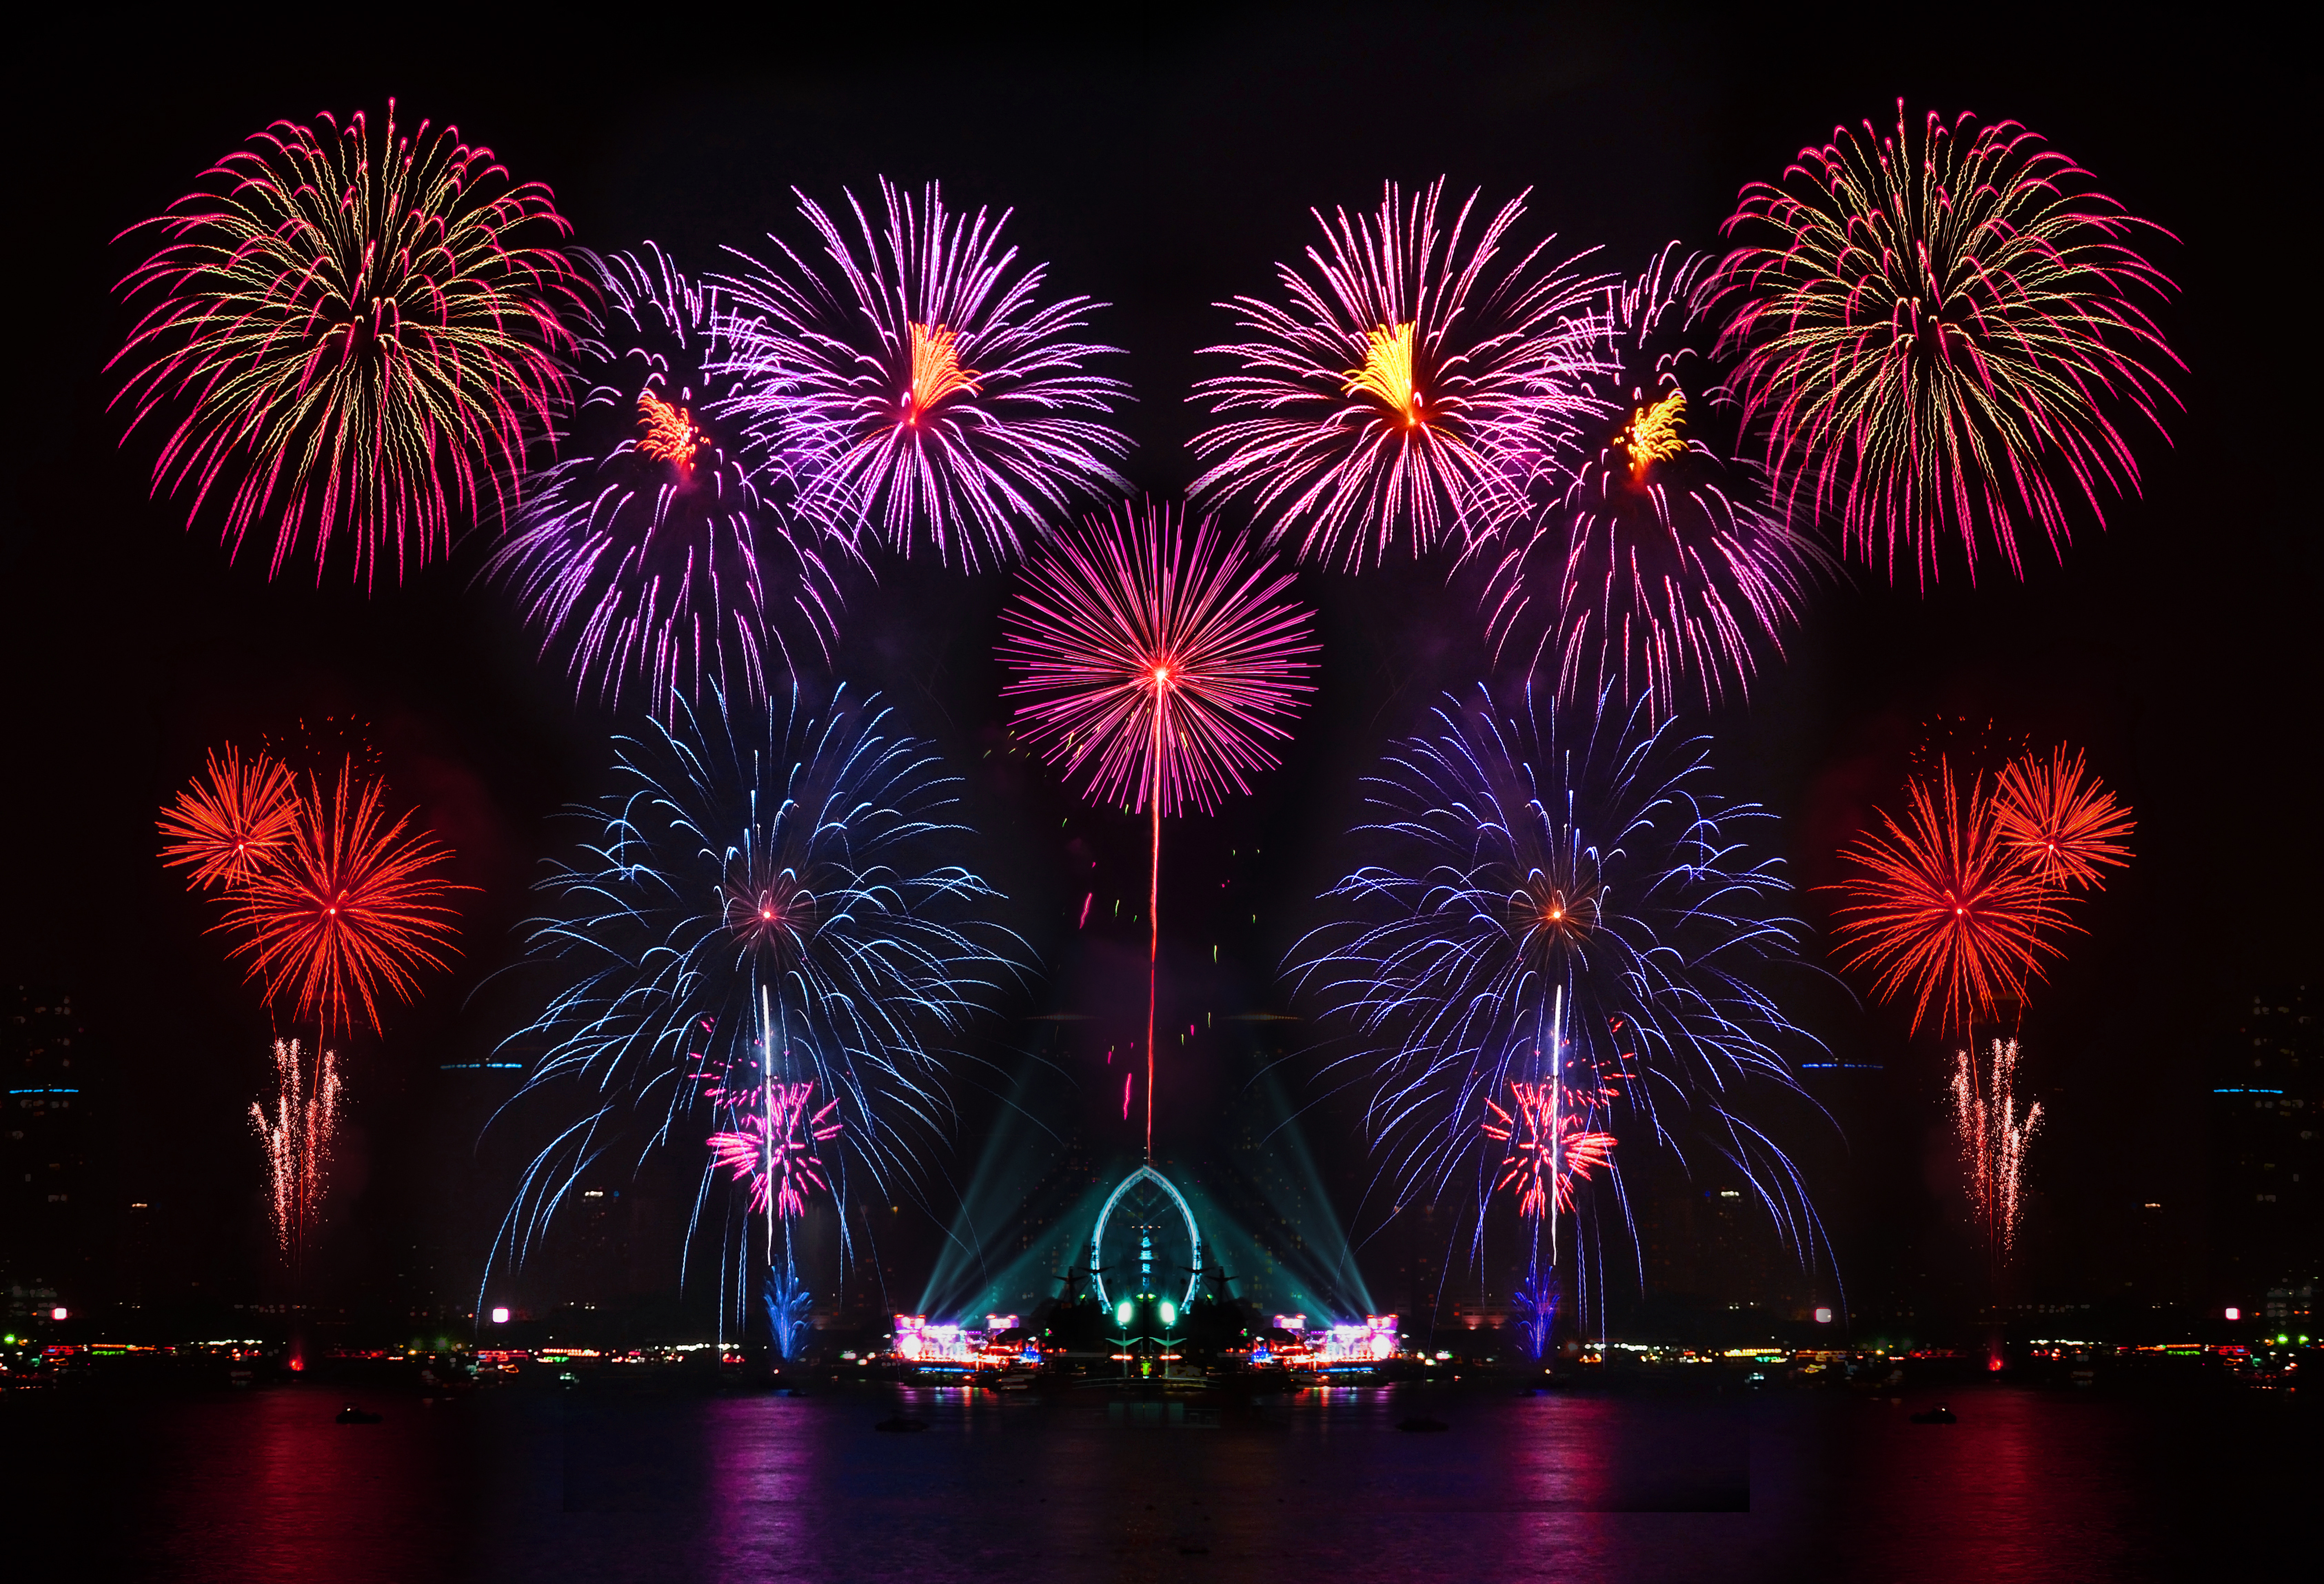 Fireworks over City 4k Ultra HD Wallpaper | Background Image | 6742x4596 New Years Fireworks Wallpaper 2015